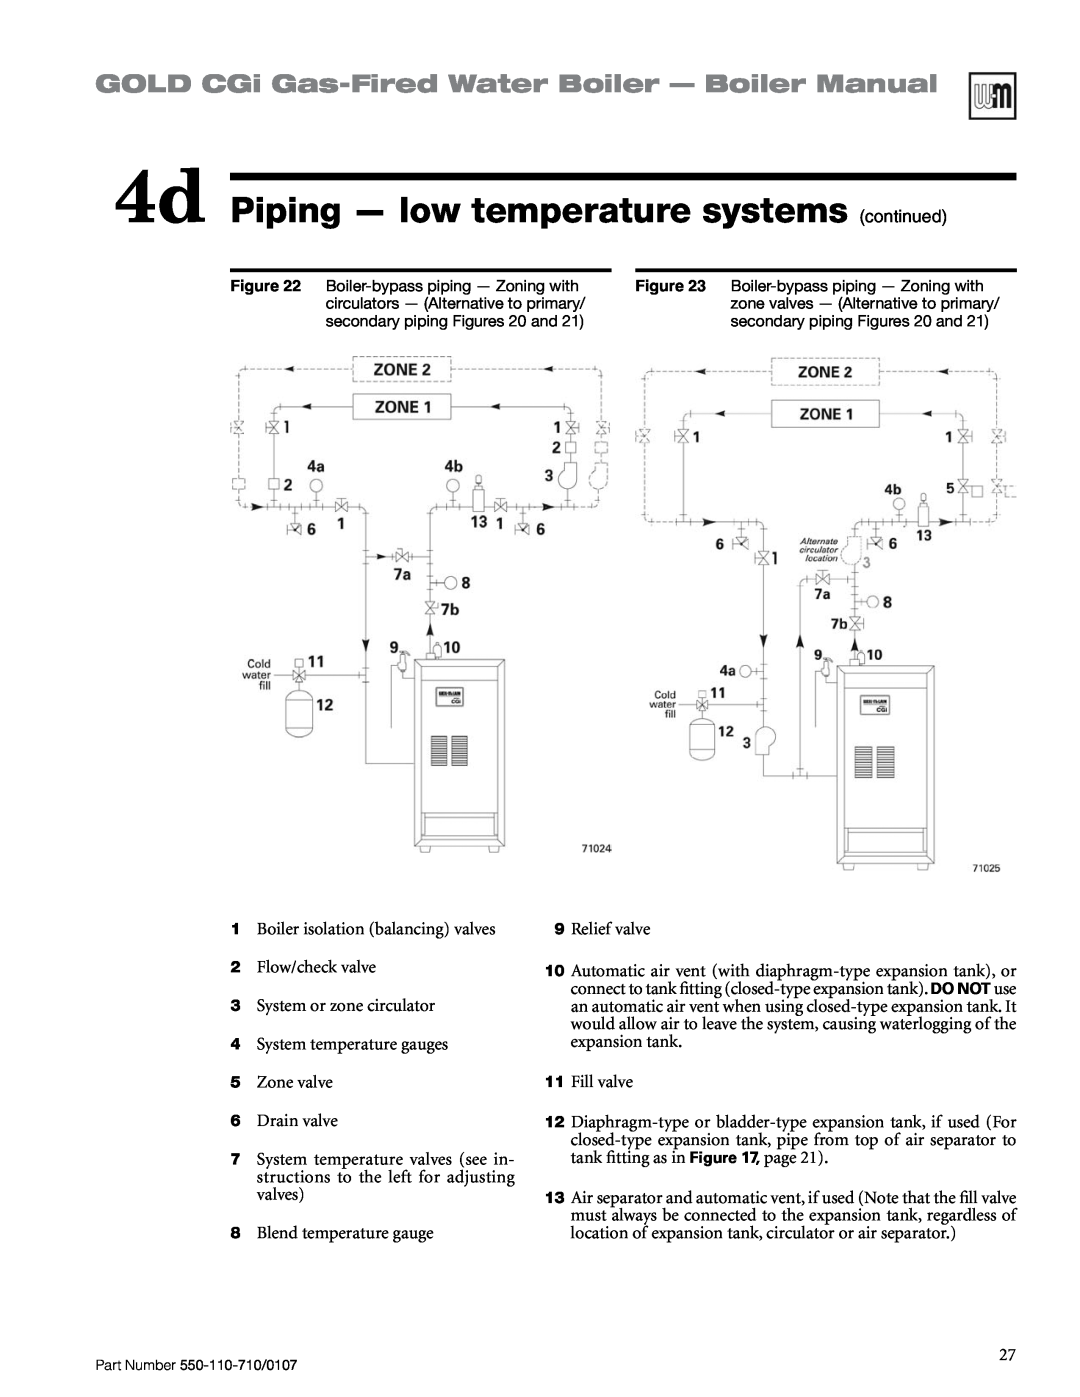 Weil-McLain Series 2 manual 4d Piping — low temperature systems continued, GOLD CGi Gas-FiredWater Boiler - Boiler Manual 